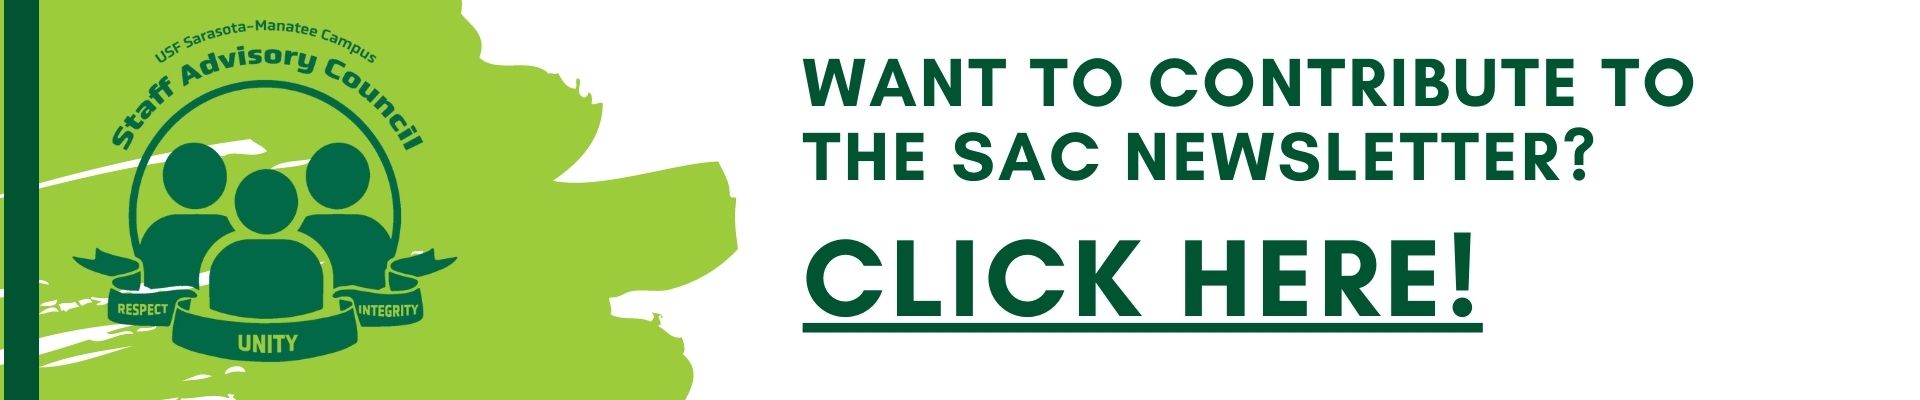 Click here to contribute to the SAC Newsletter!